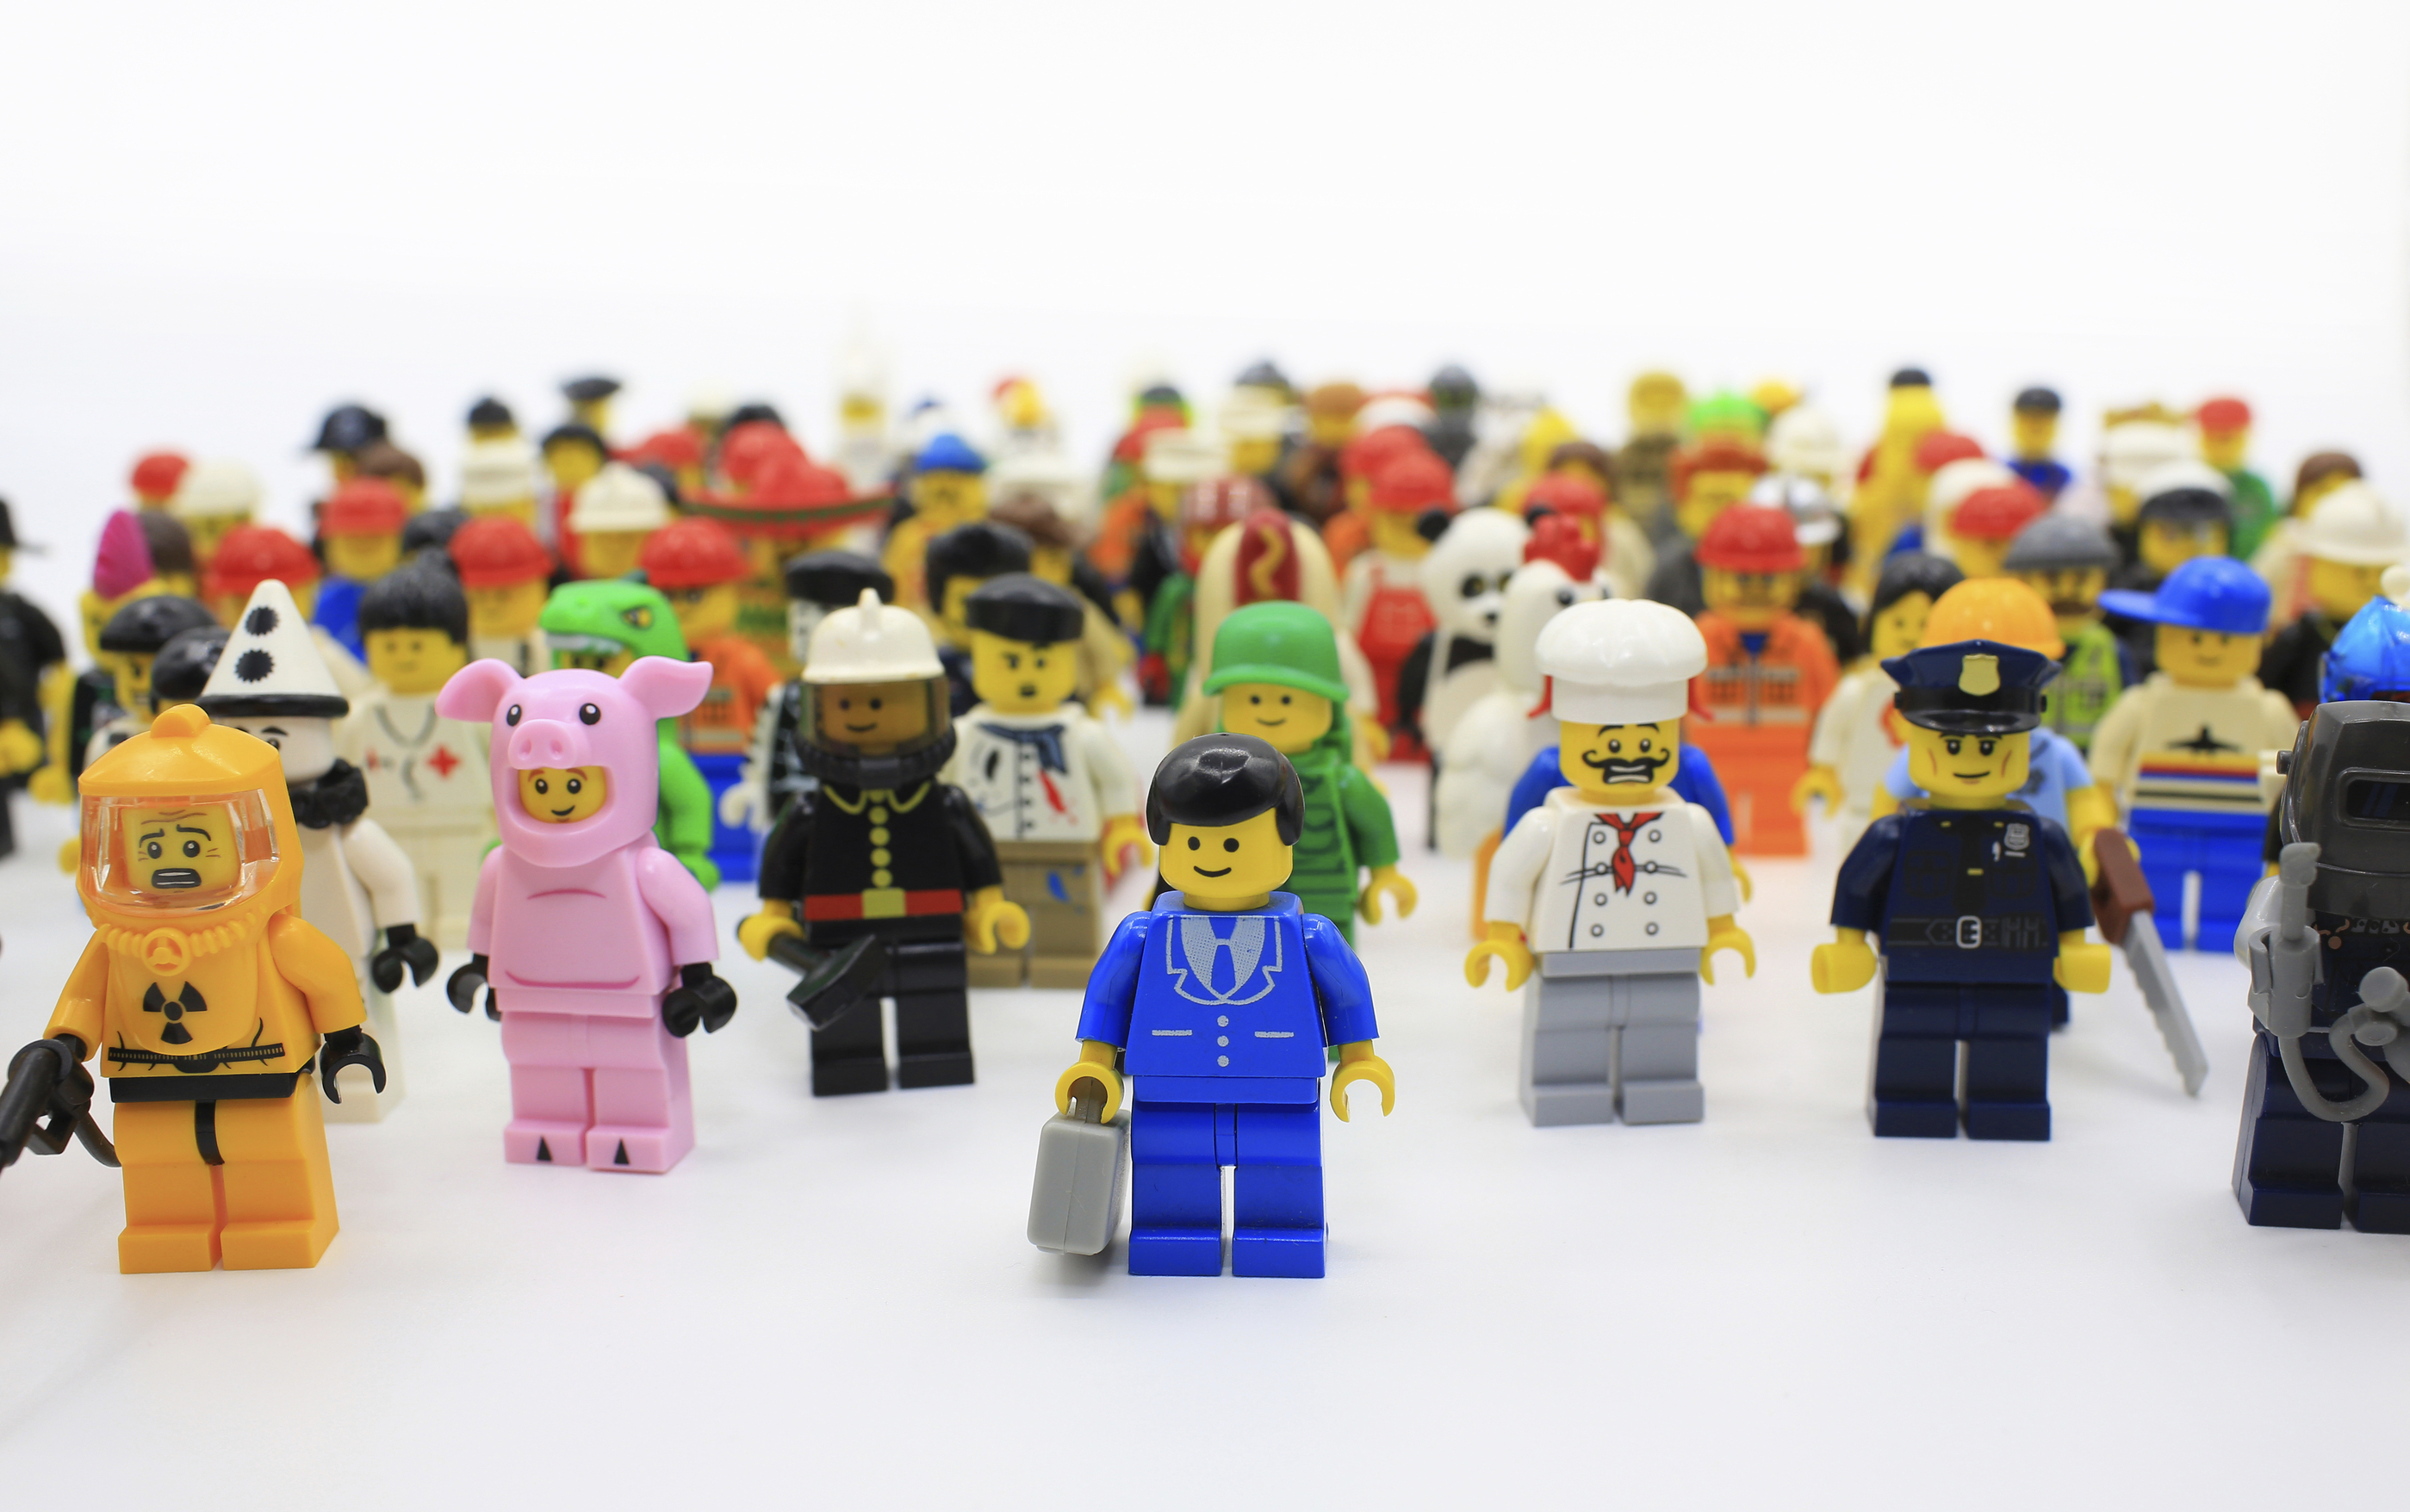 Lego minifigure are the successful line in Lego products